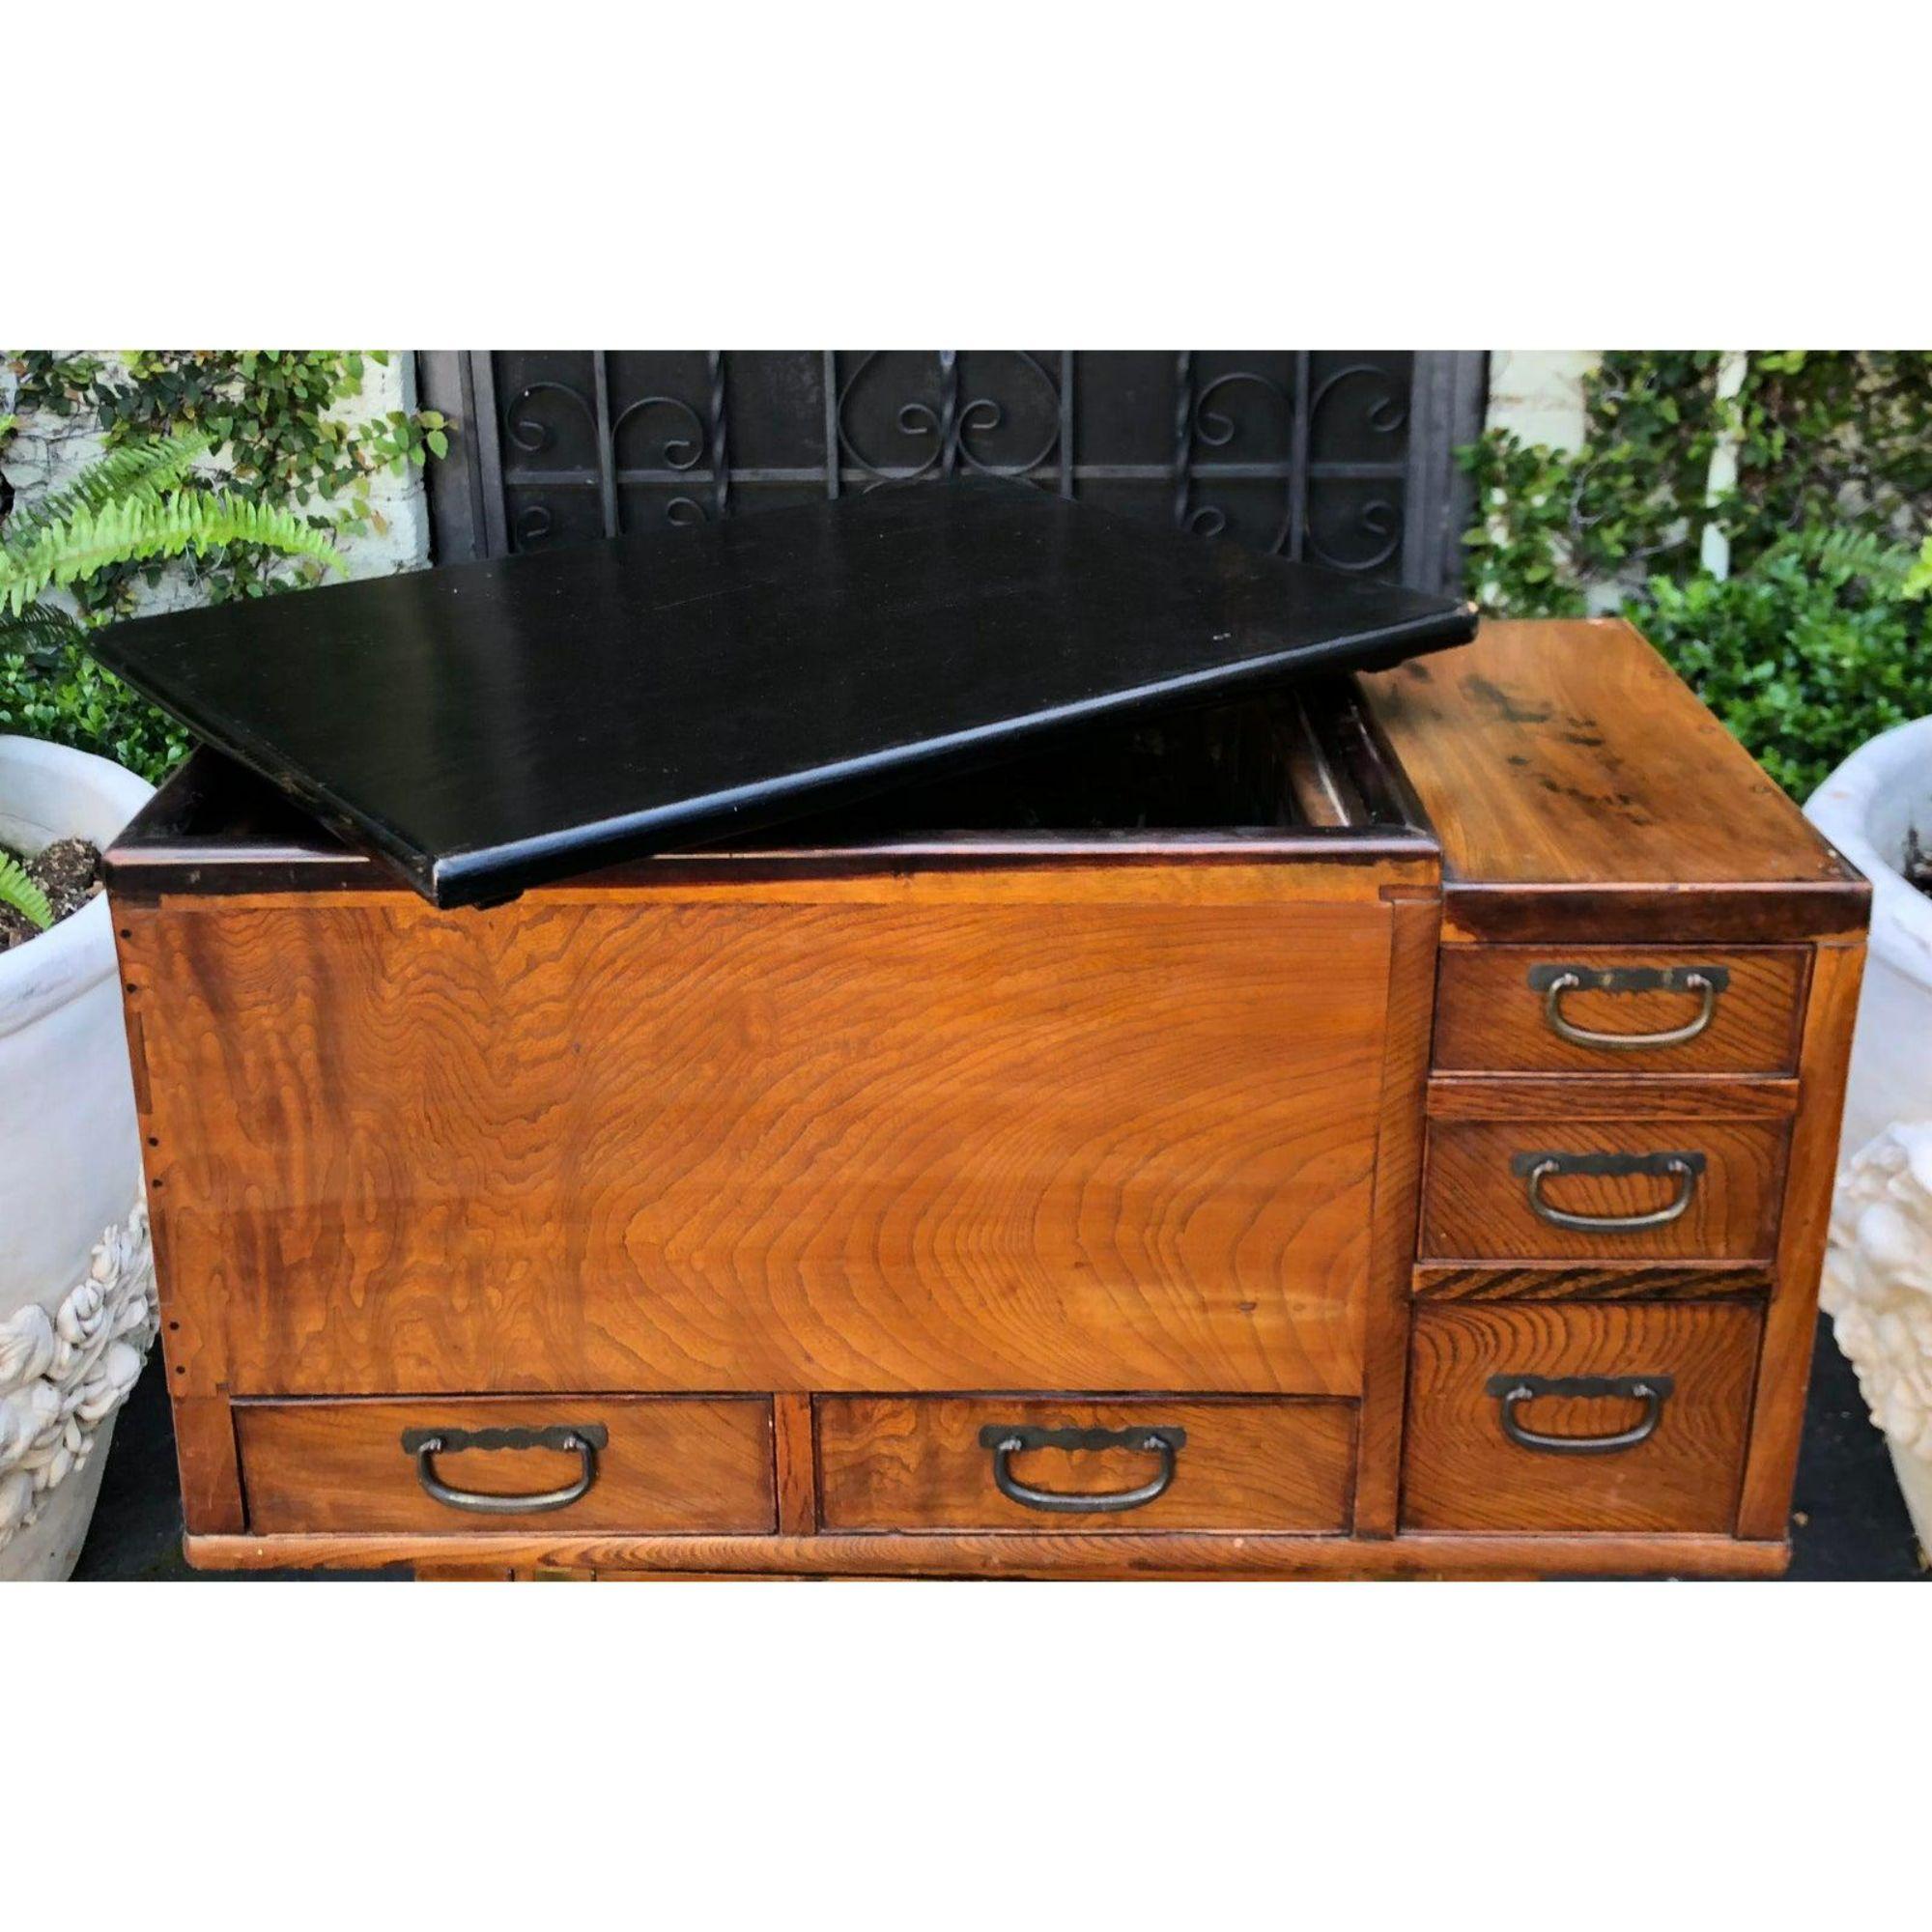 19th Century Antique Japanese Five Drawer Copper Lined Hibachi, circa 1870